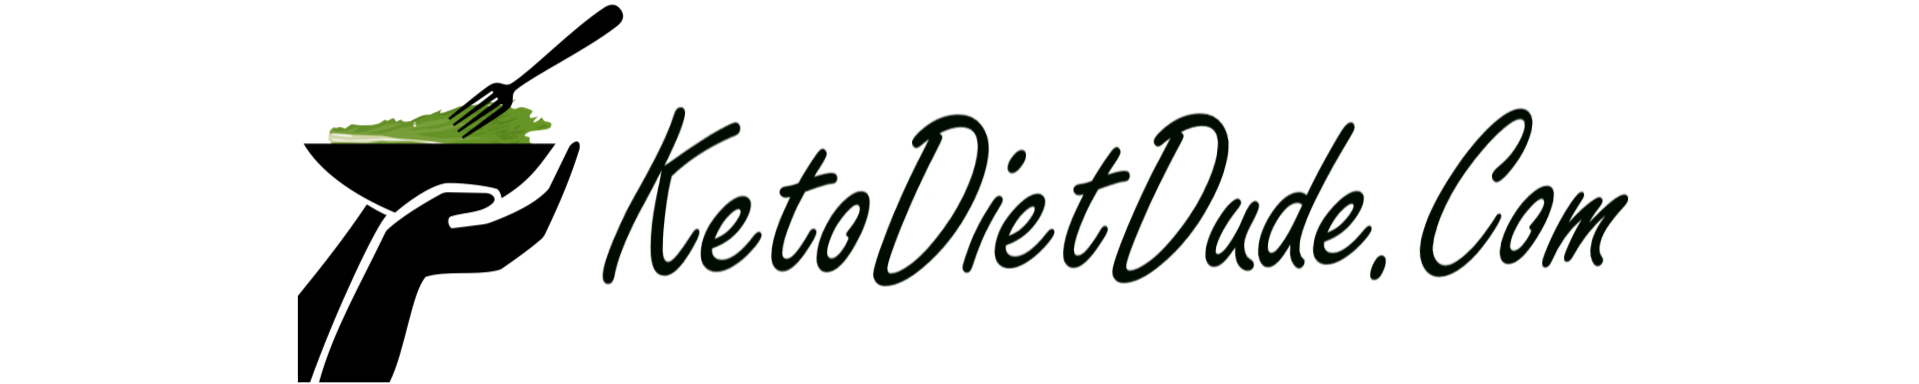 Keto Diet Dude written with its icon placed before it